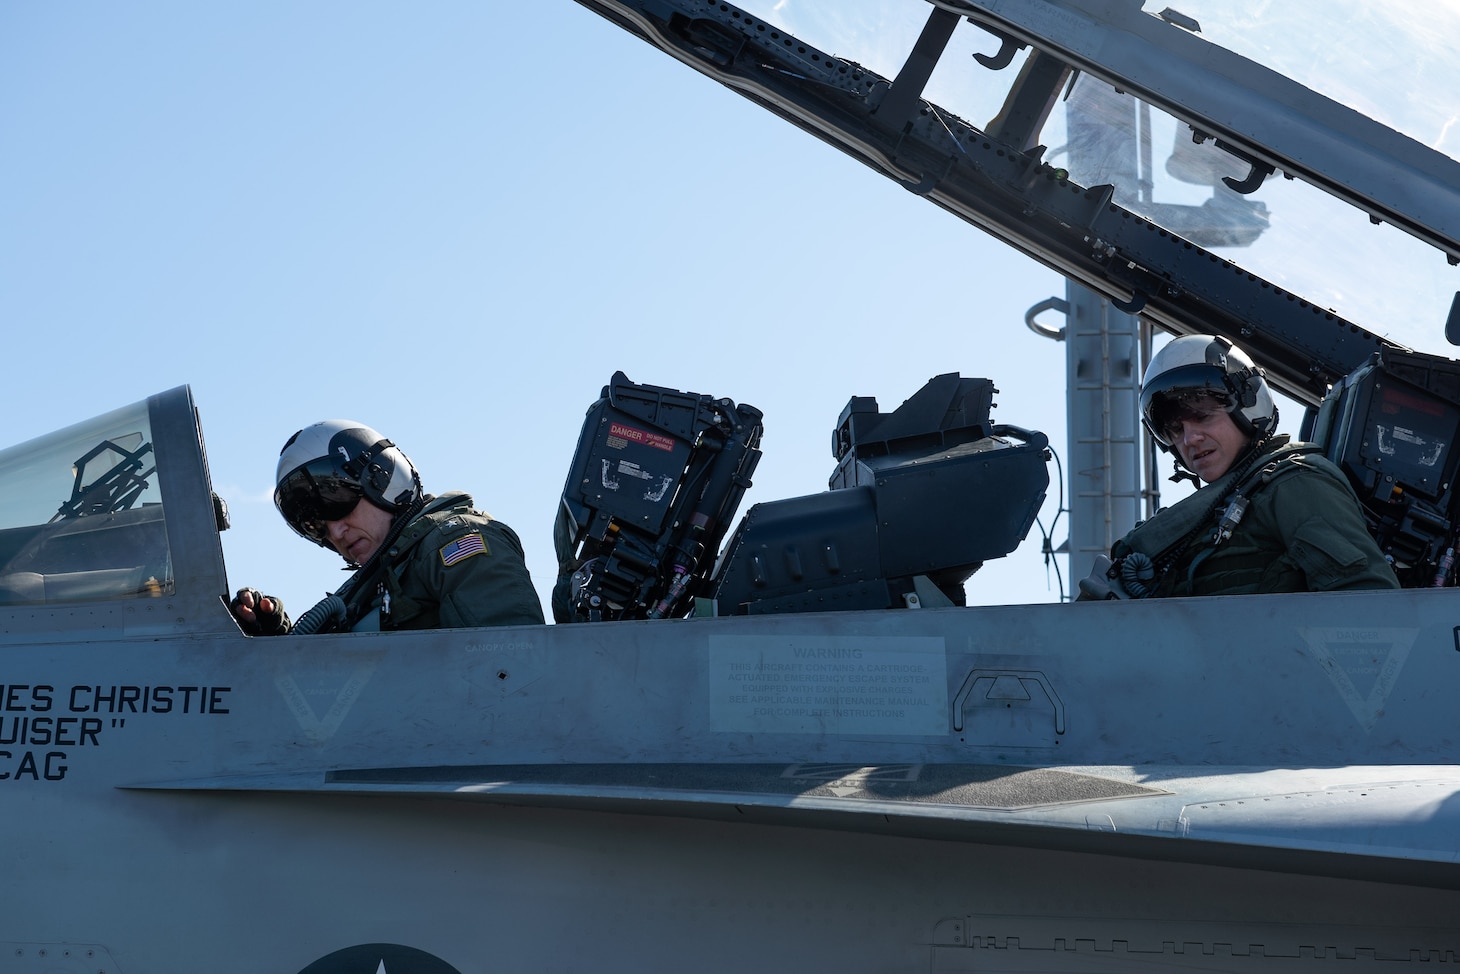 PHILIPPINE SEA (Nov. 16, 2018) Rear Adm. Michael Wettlaufer, commander, Carrier Strike Group (CSG) 3, left, and Capt. Steven Hejmanowski, commander, Carrier Airwing (CVW) 9, prepare for flight operations in an EA-18G Growler, with Electronic Attack Squadron (VAQ) 133, on the flight deck aboard the Nimitz-class aircraft carrier USS John C. Stennis (CVN 74). John C. Stennis is underway and conducting operations in international waters as part of a dual carrier strike force exercise. The U.S. Navy has patrolled the Indo-Pacific region routinely for more than 70 years promoting regional security, stability and prosperity.